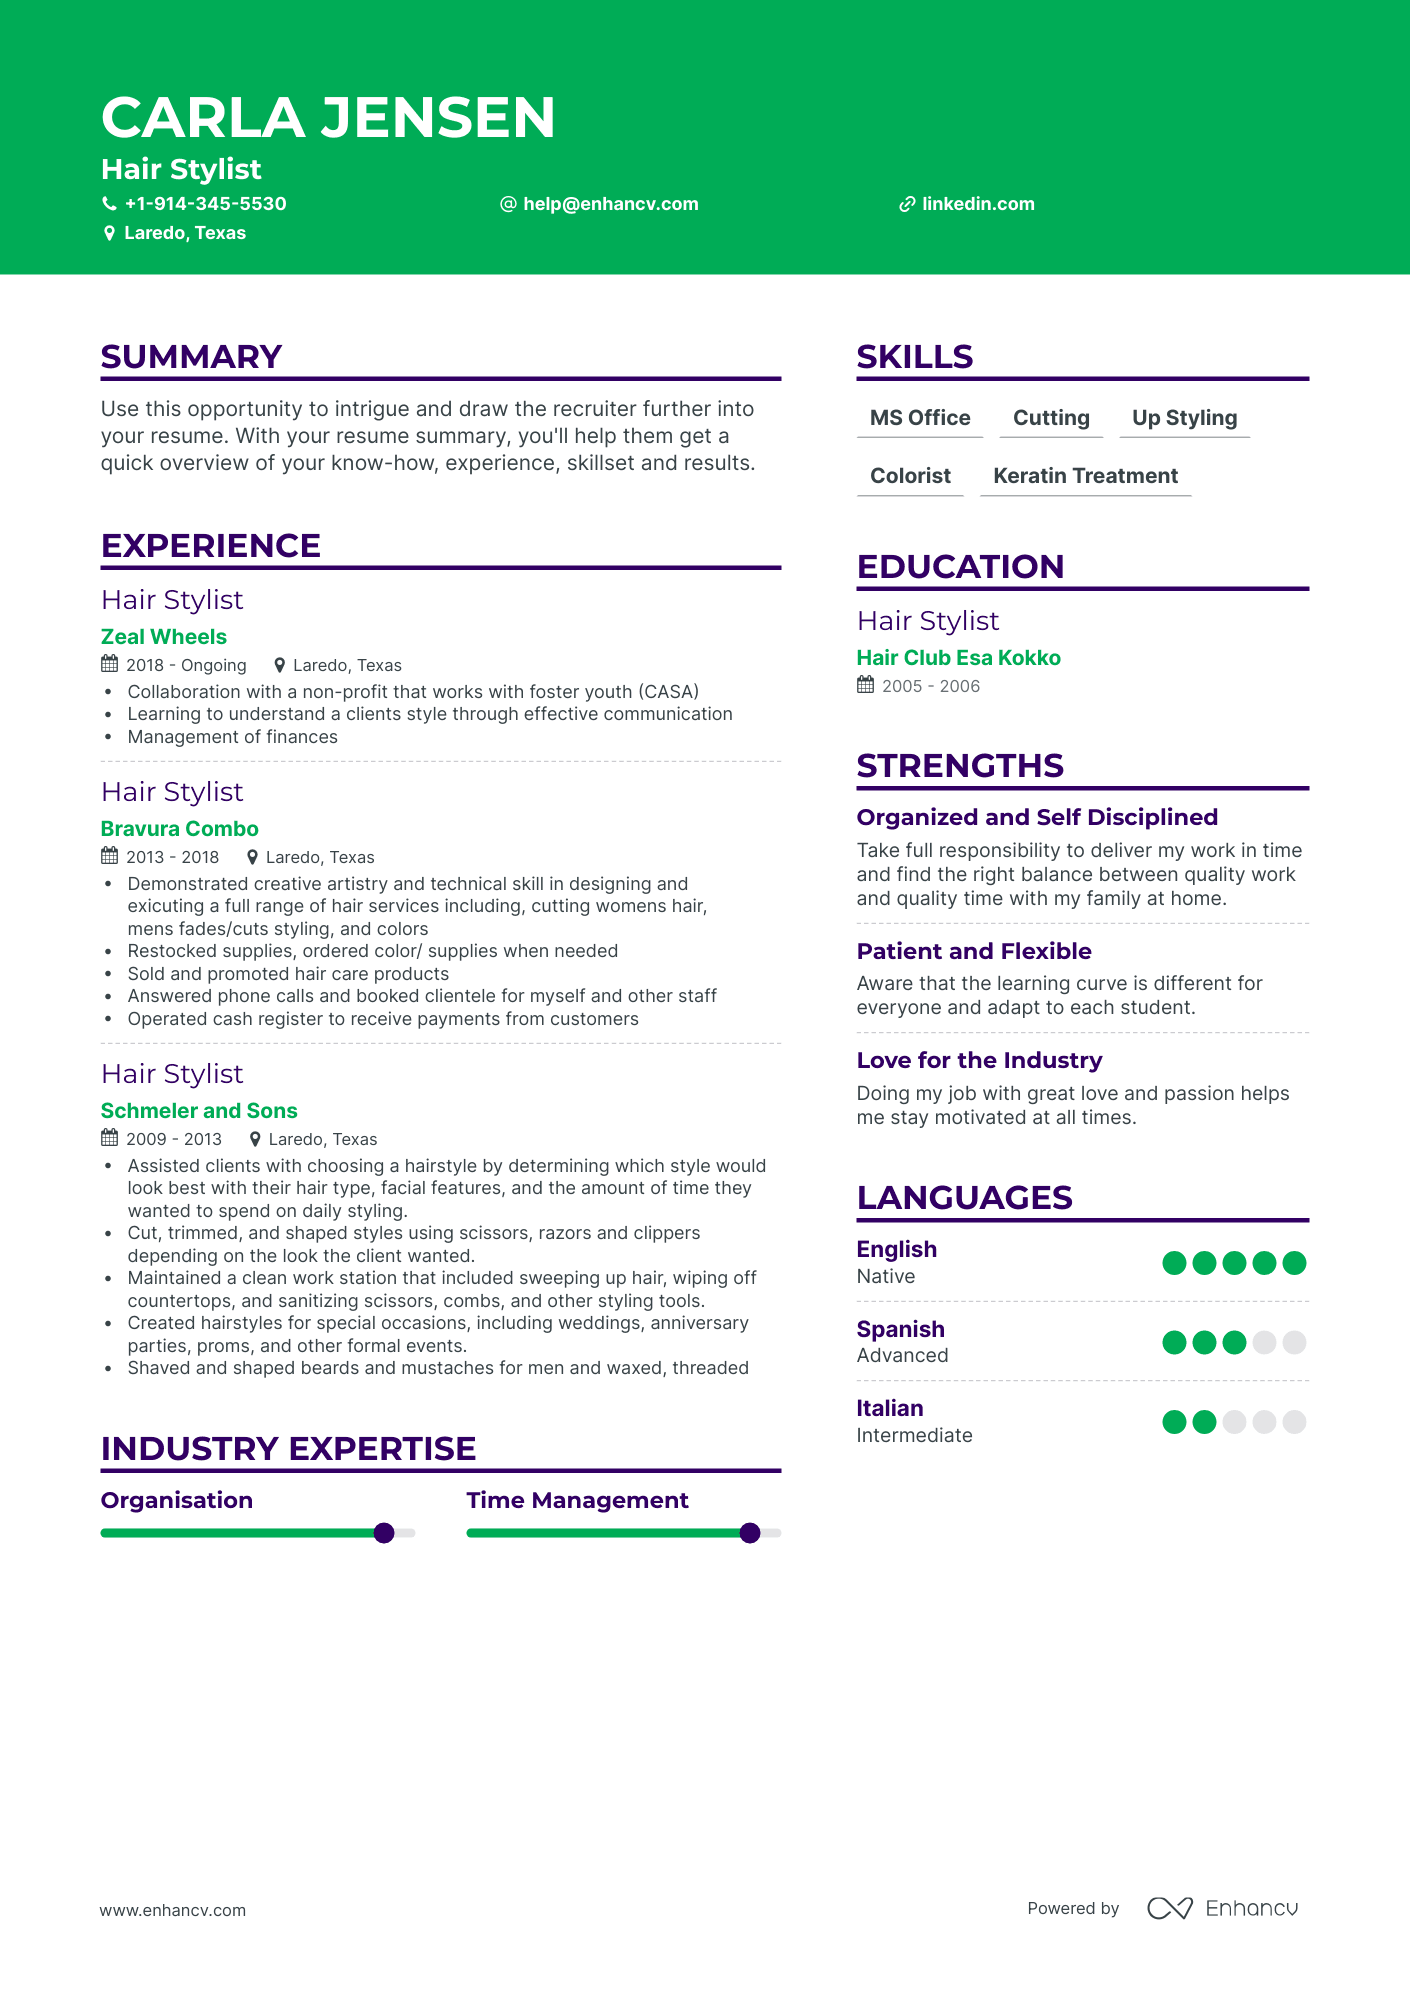 Hair Stylist Resume Examples & Guide for 2023 (Layout, Skills, Keywords ...